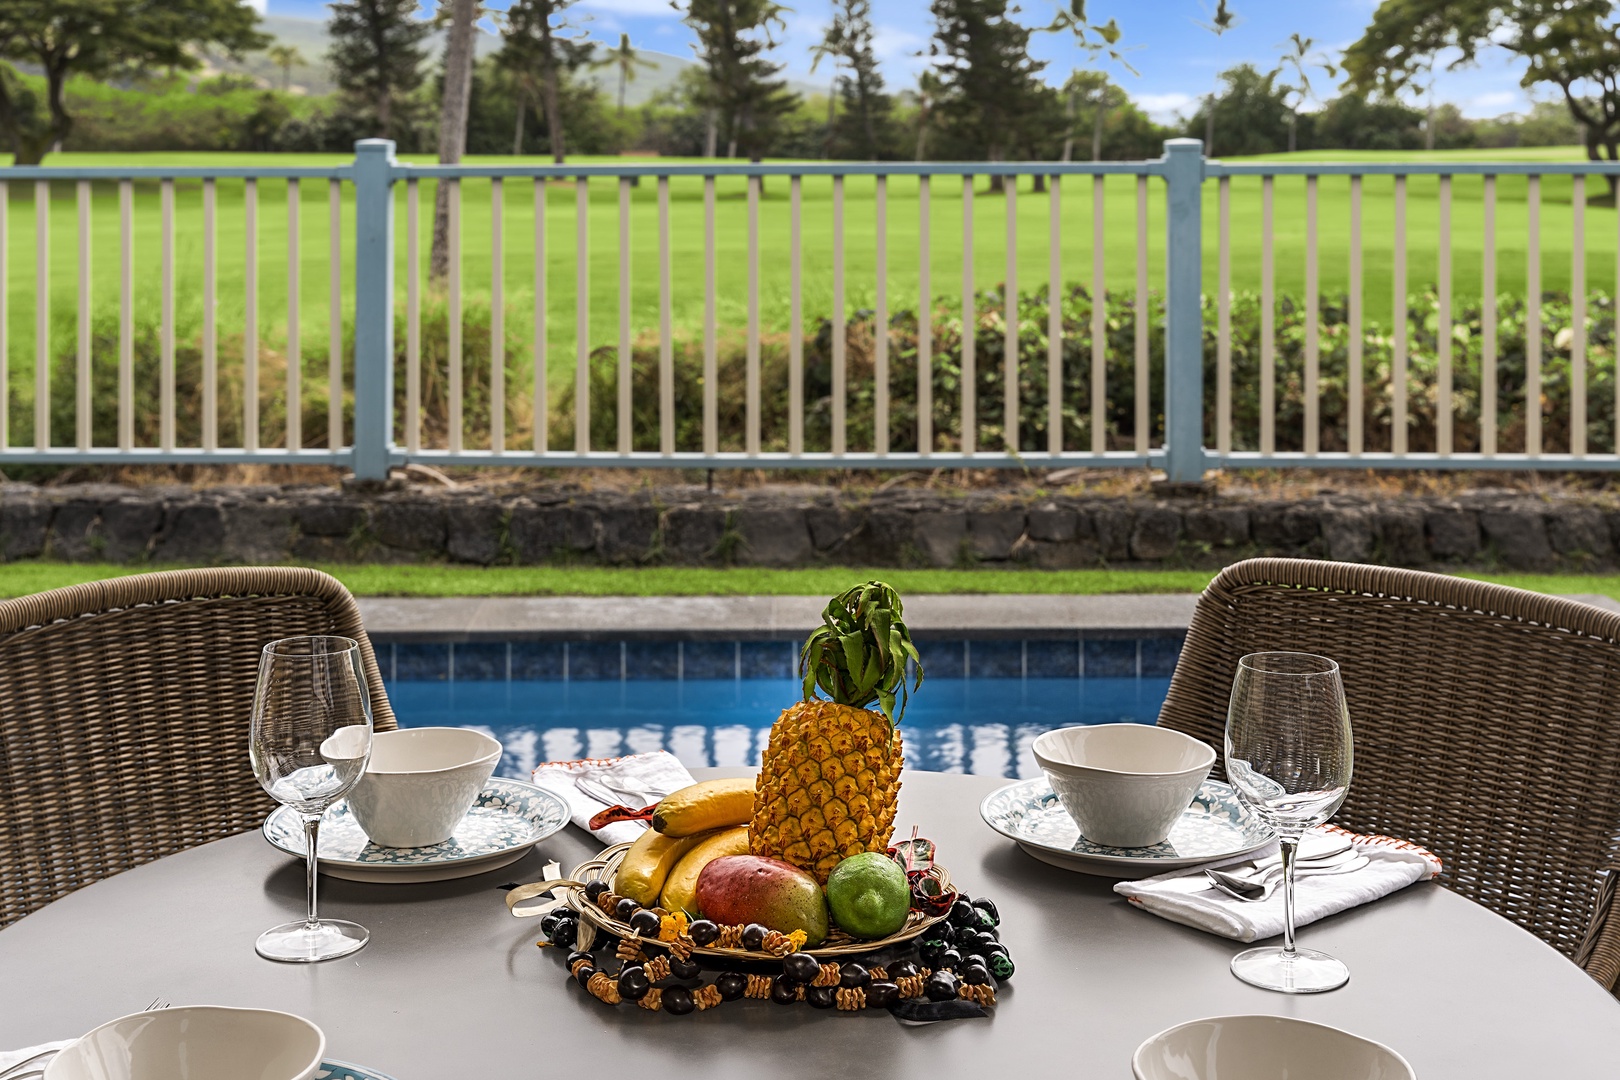 Kailua-Kona Vacation Rentals, Holua Kai #8 - Enjoy the Golf and Pool View while sipping a coffee